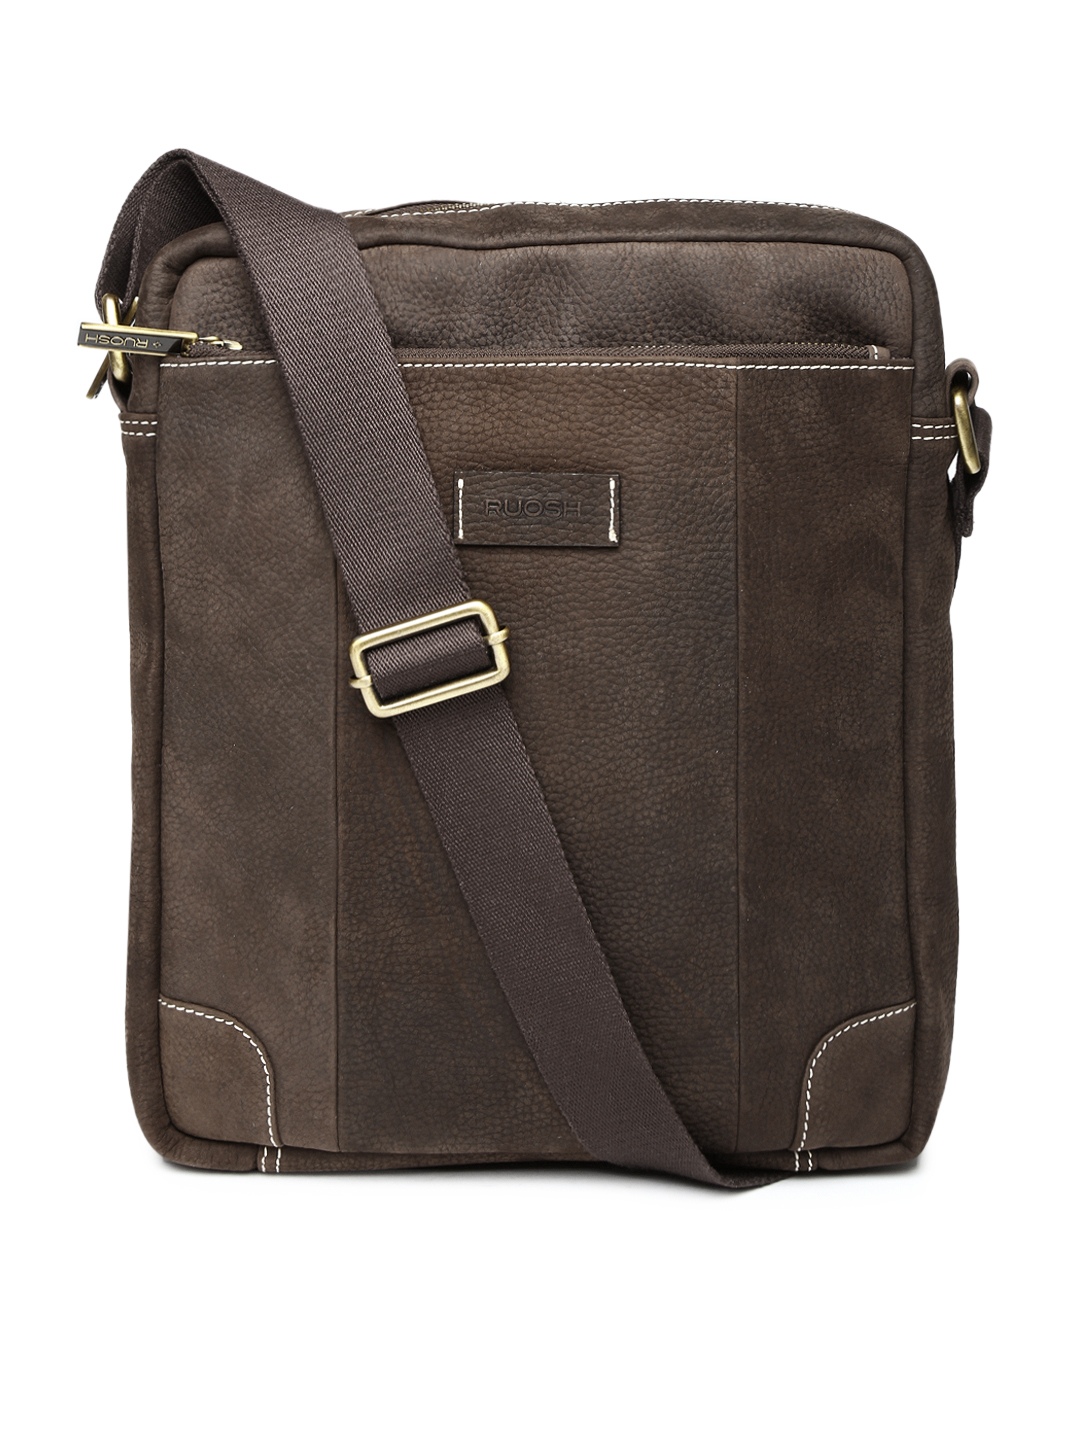 Myntra Ruosh Men Brown Leather Messenger Bag 828254 | Buy Myntra at best price online. All ...